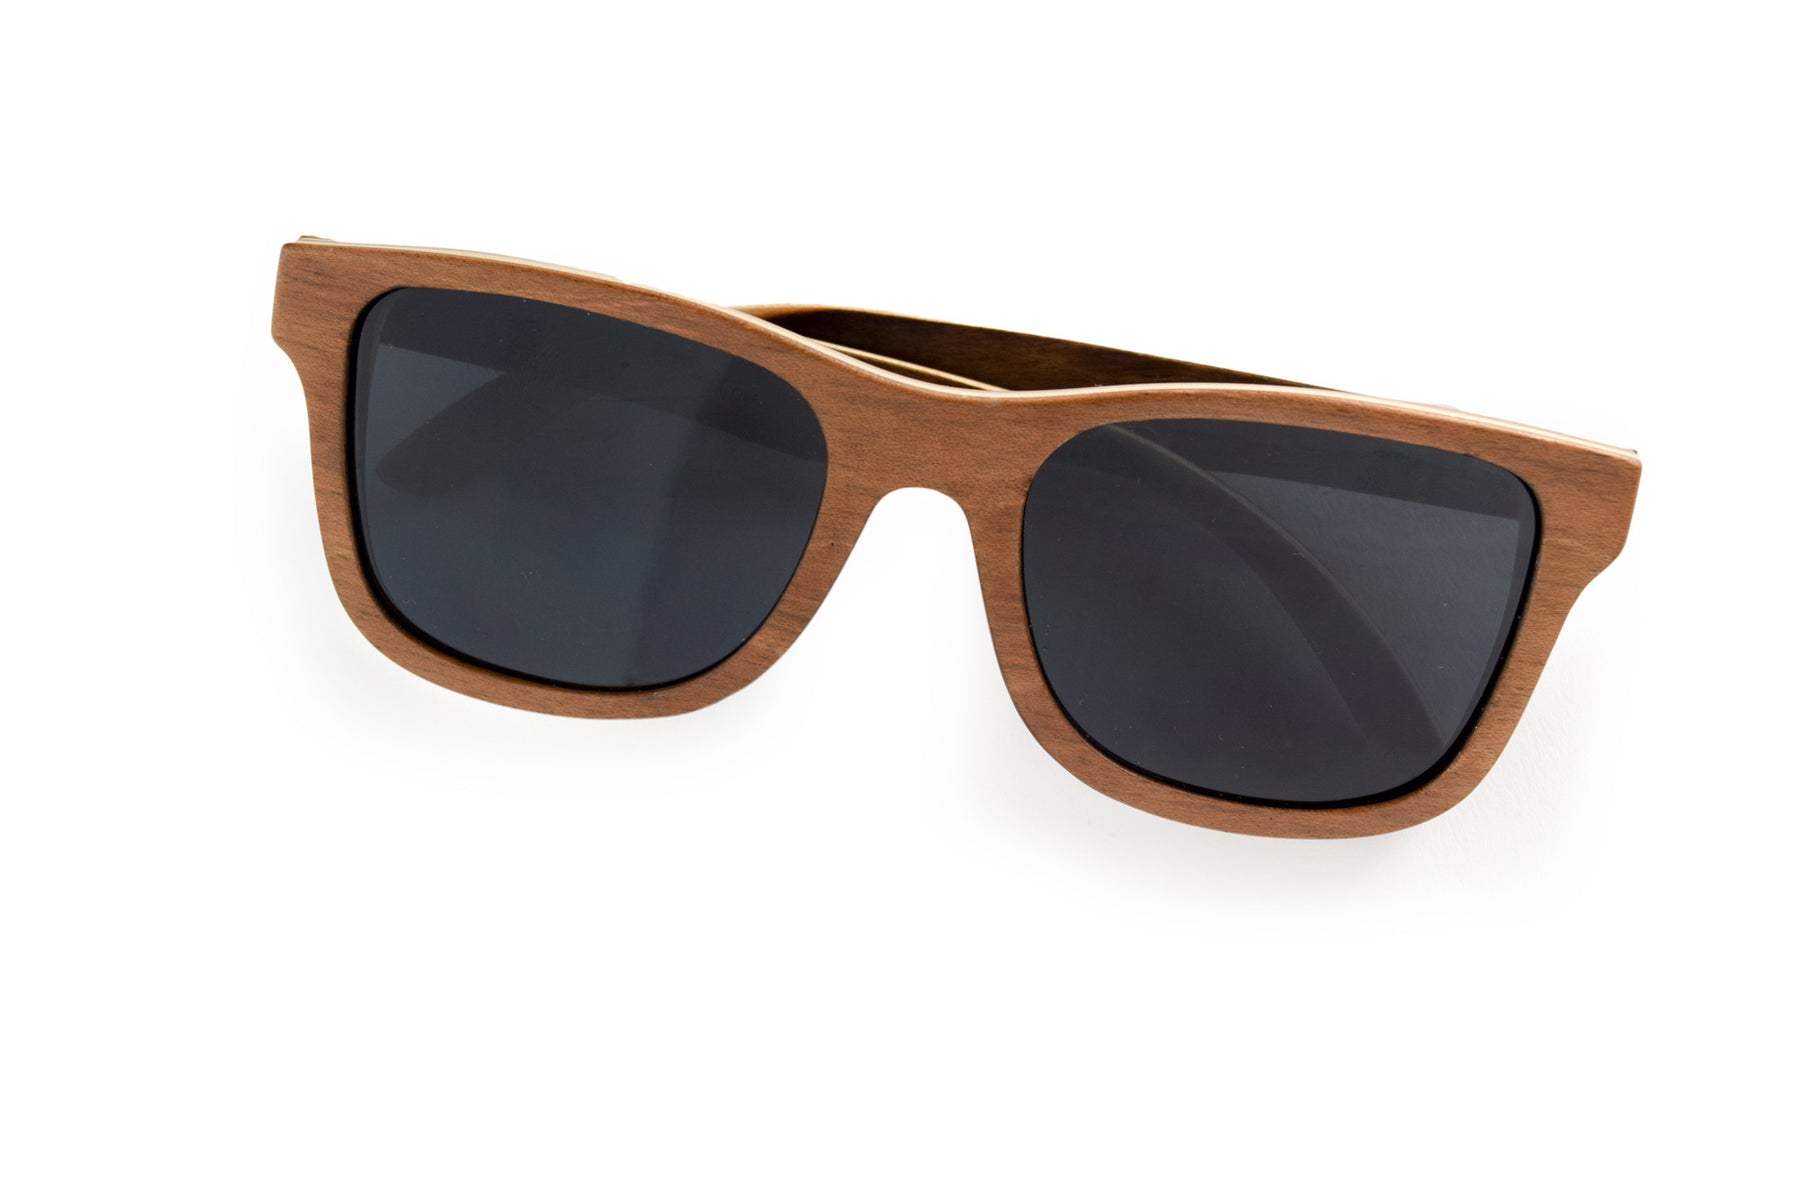 Stylish Wooden Sunglasses with Wooden Case – Scotch & Cola